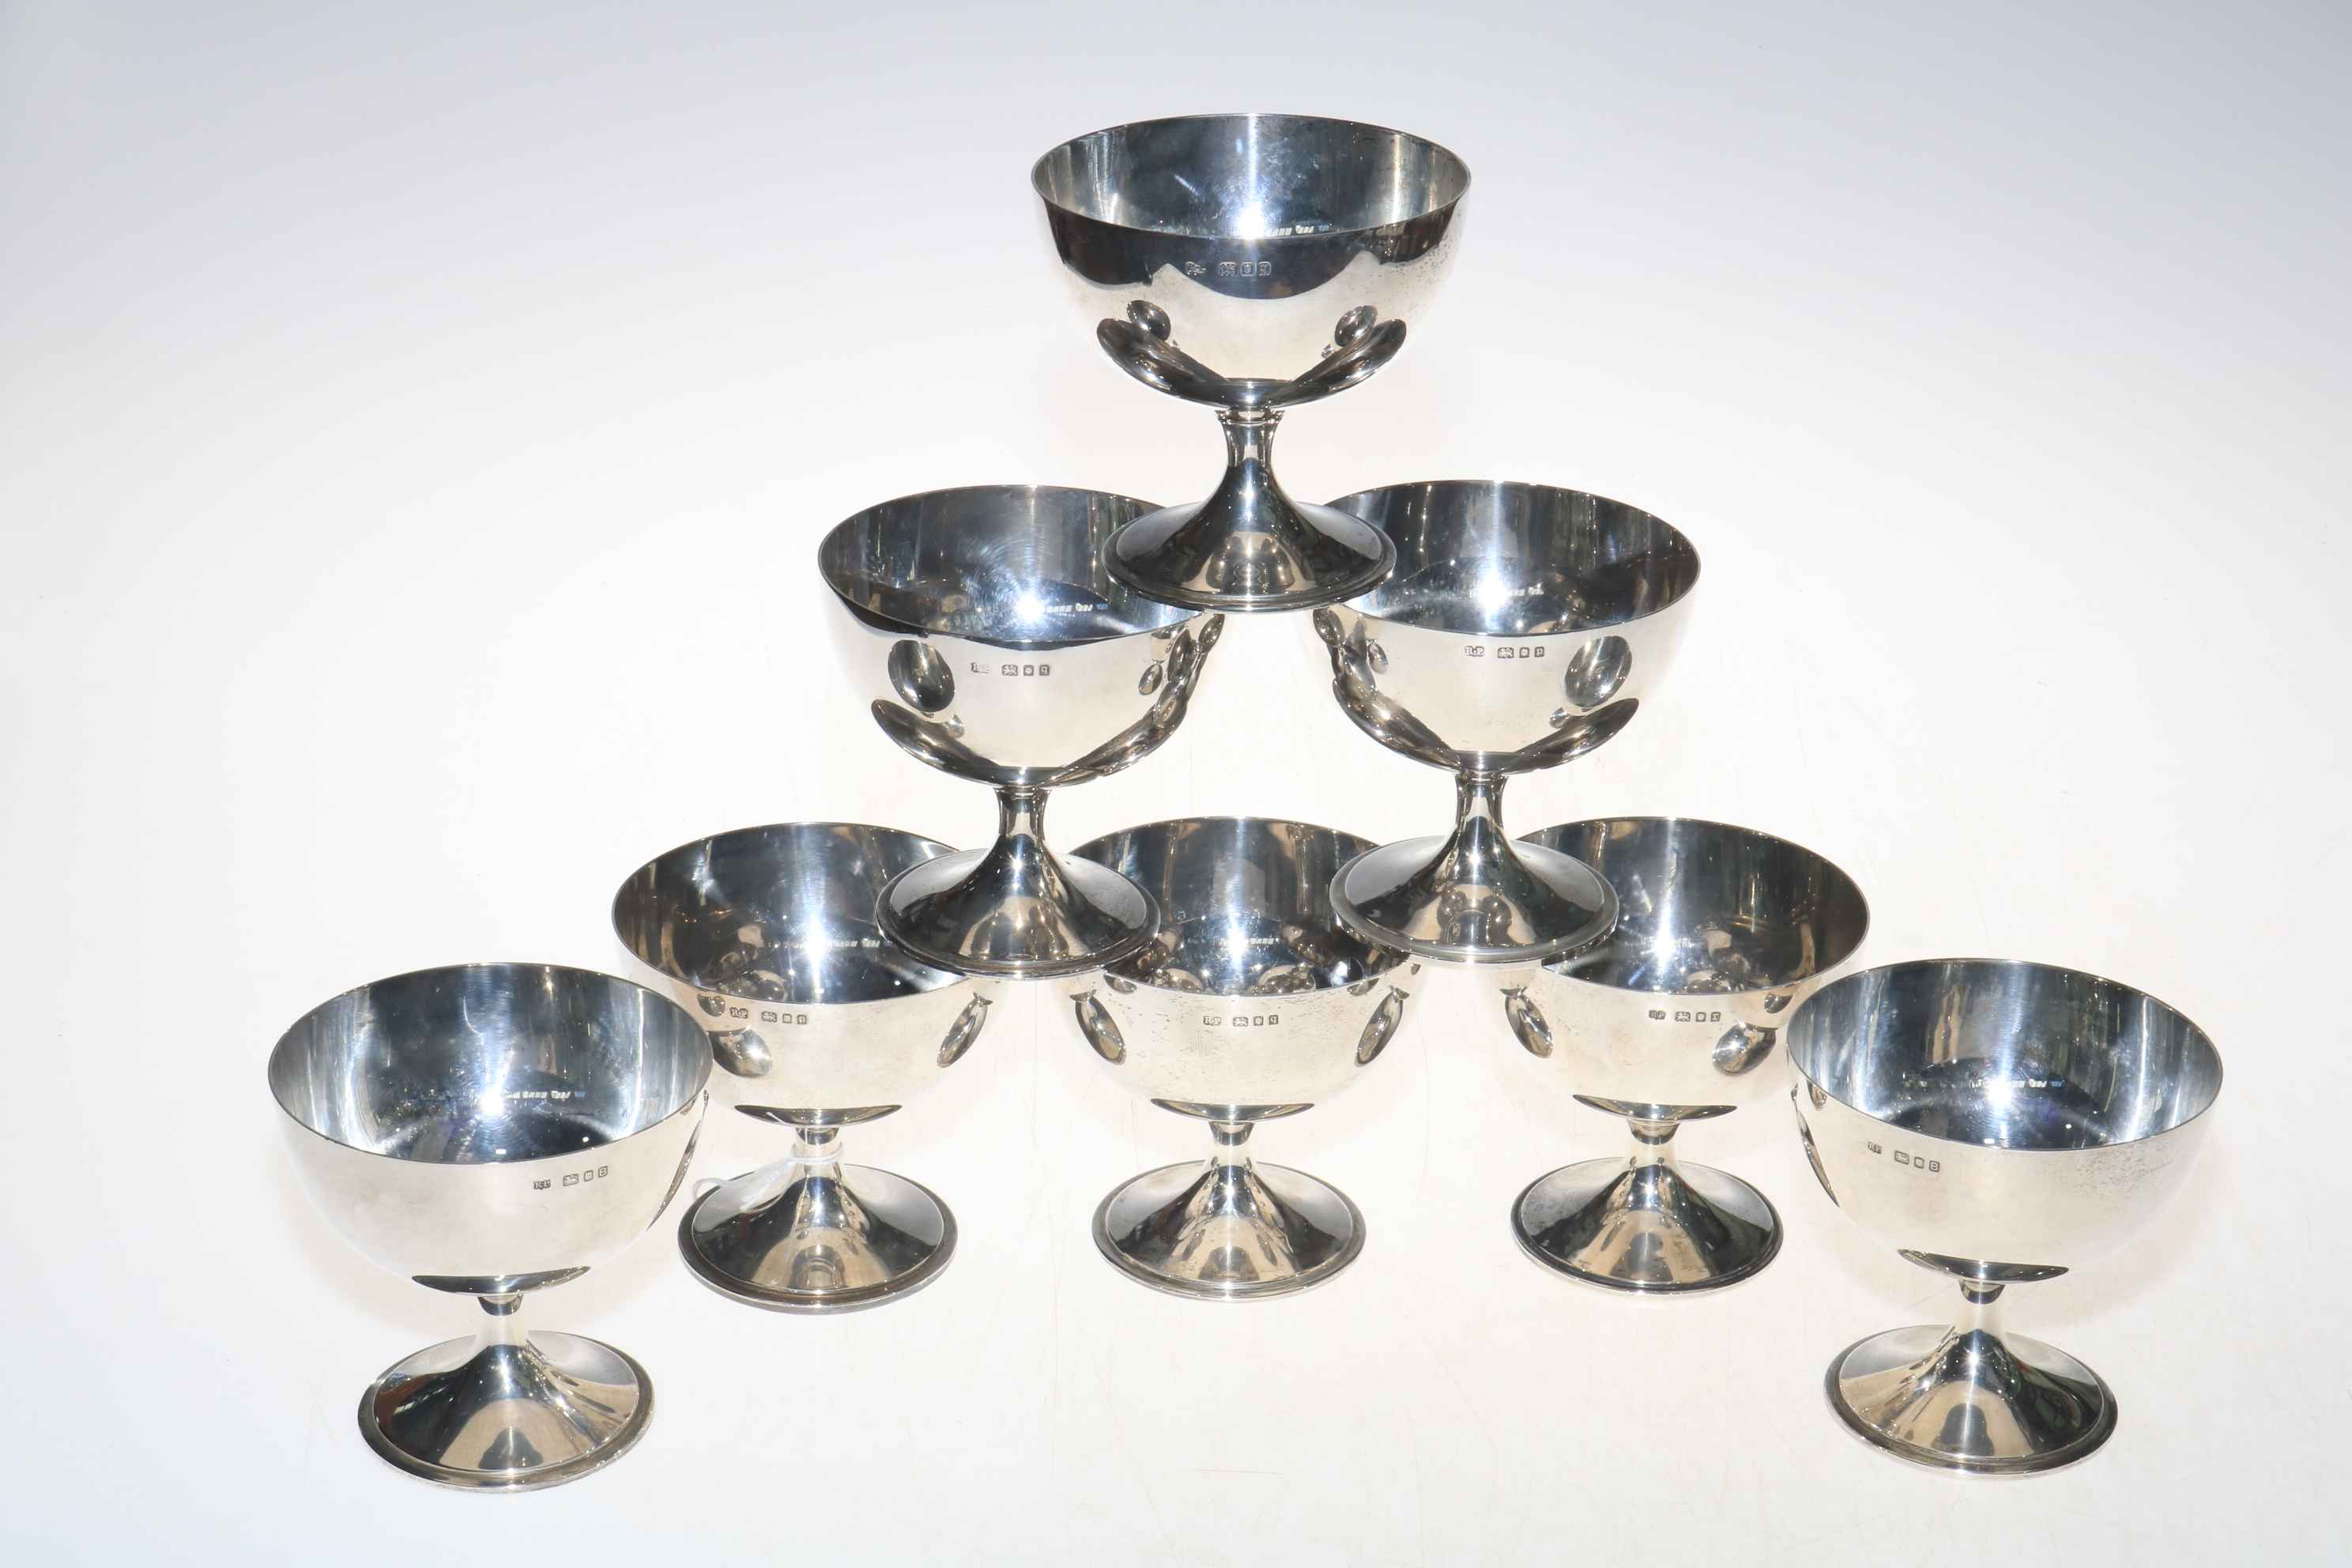 Set of eight silver grapefruit dishes, makers mark RP, London 1937.